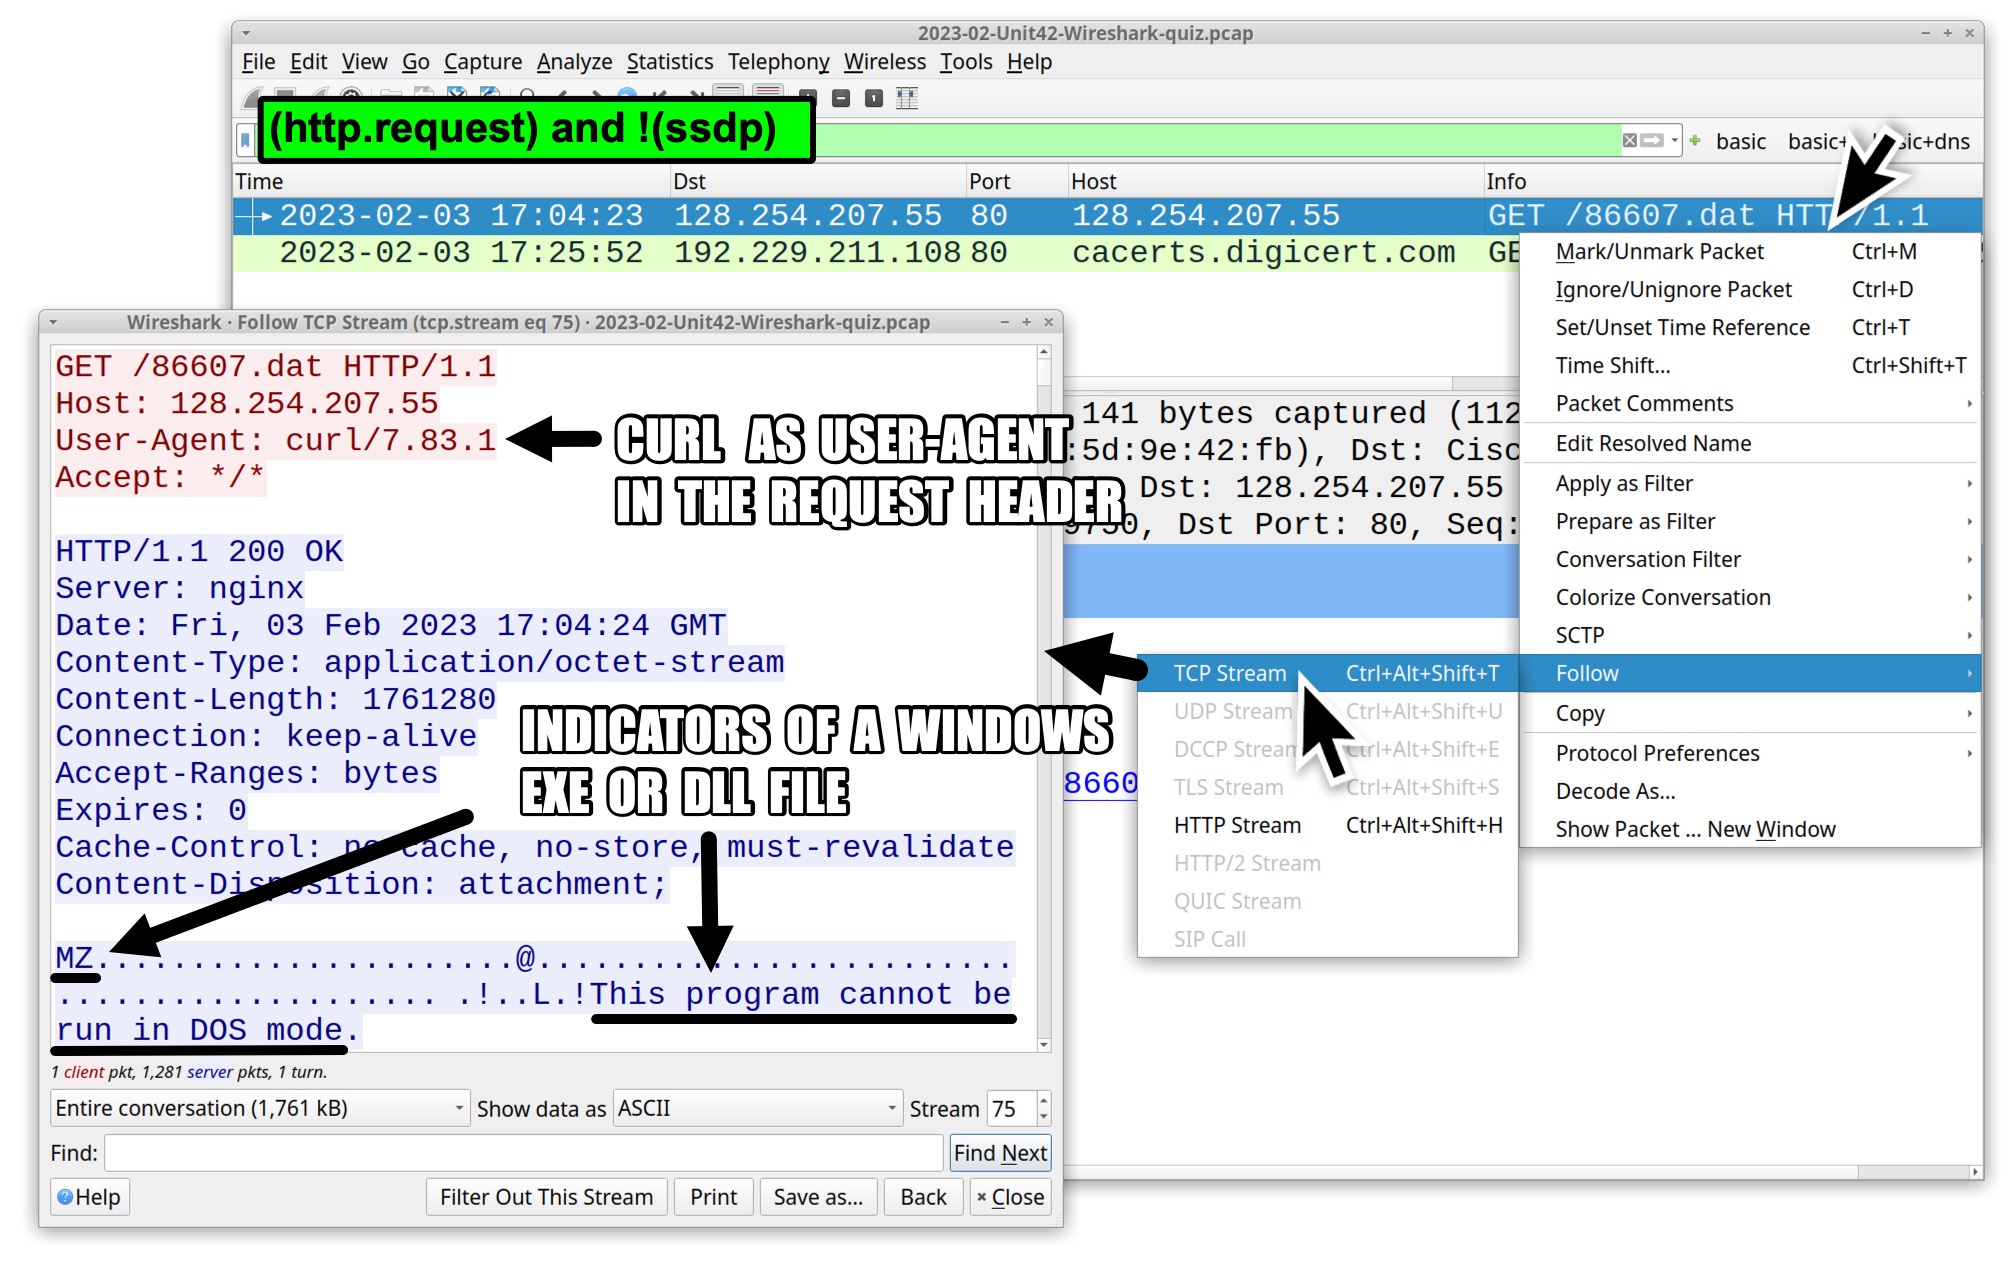 Image 4 is a screenshot of Wireshark showing how to navigate through the menus in order to follow the TCP stream. The TCP window shows the curl as user-agent in the request header as well as the indicators of a Windows .exe or .dll file. 